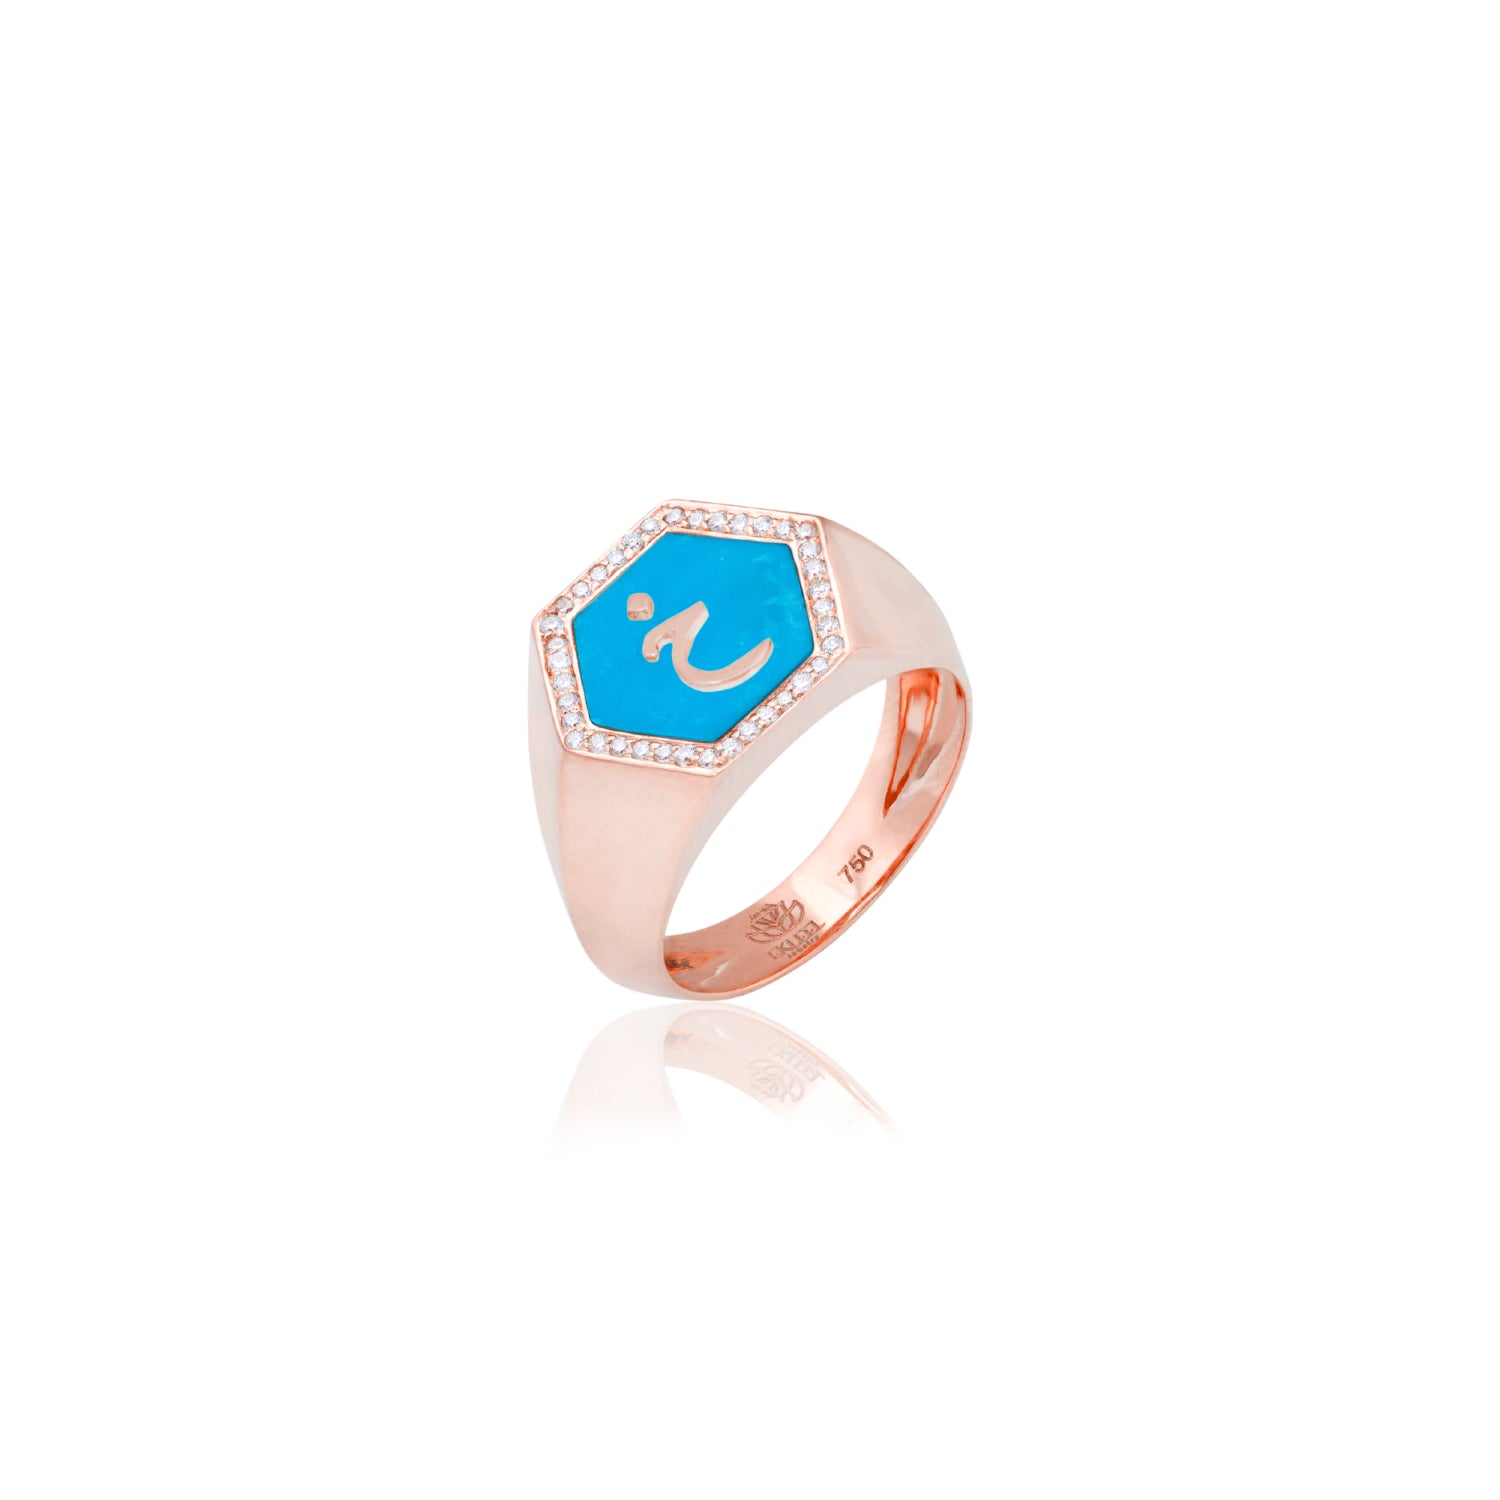 Qamoos 2.0 Letter خ Turquoise and Diamond Signet Ring in Rose Gold